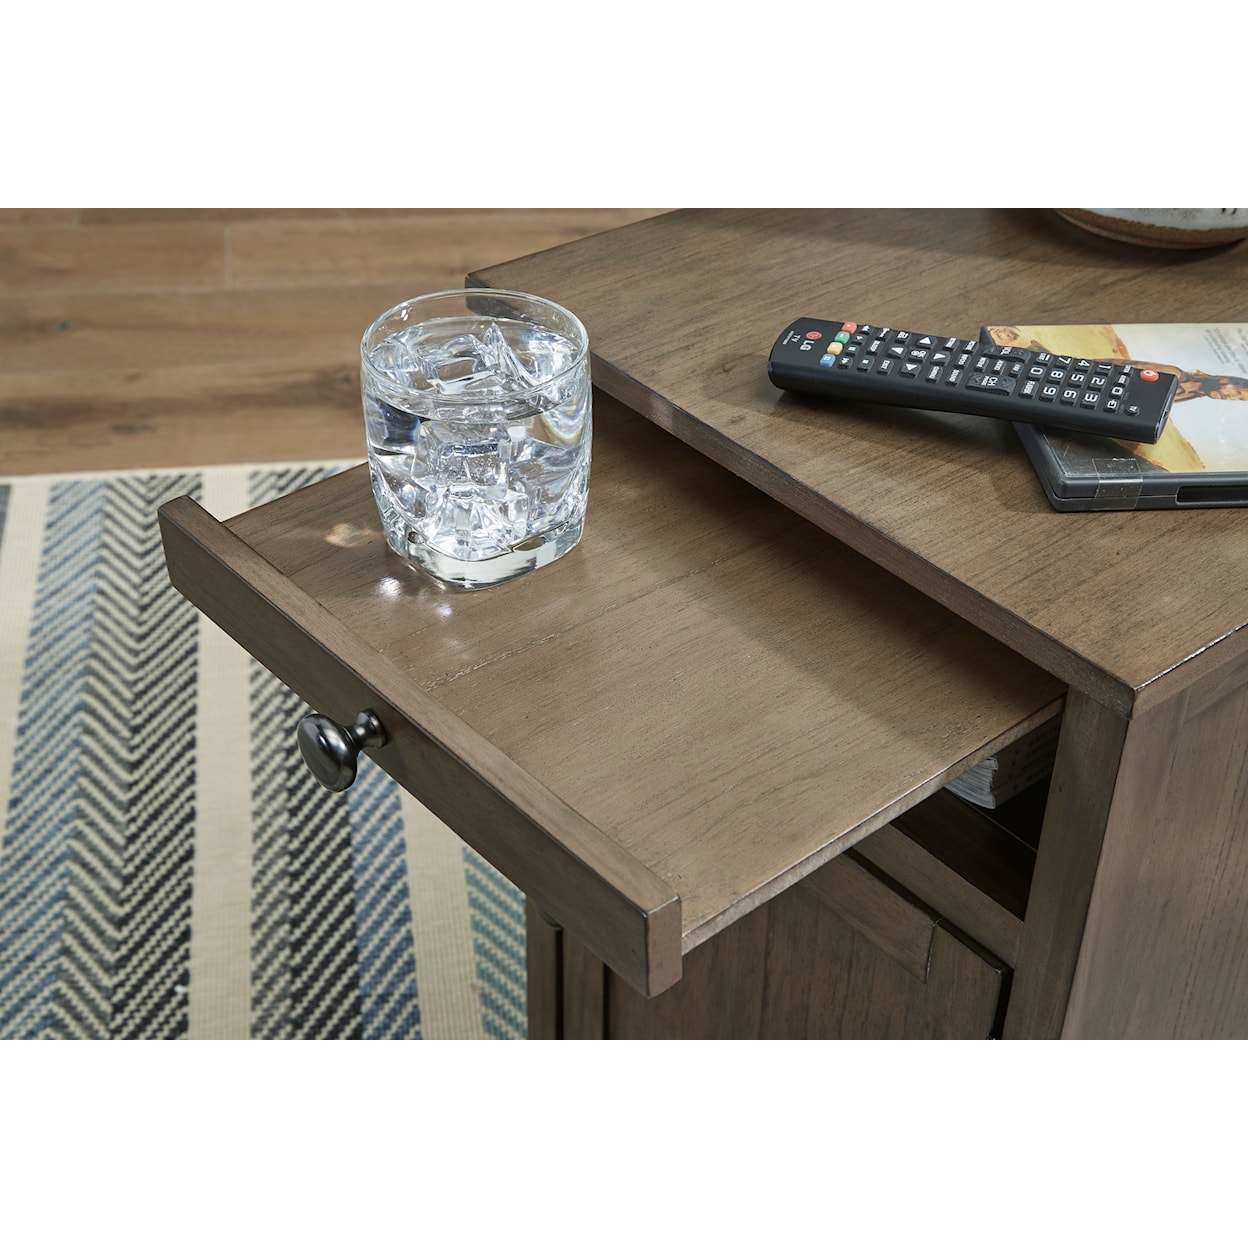 Signature Tide Chairside End Table